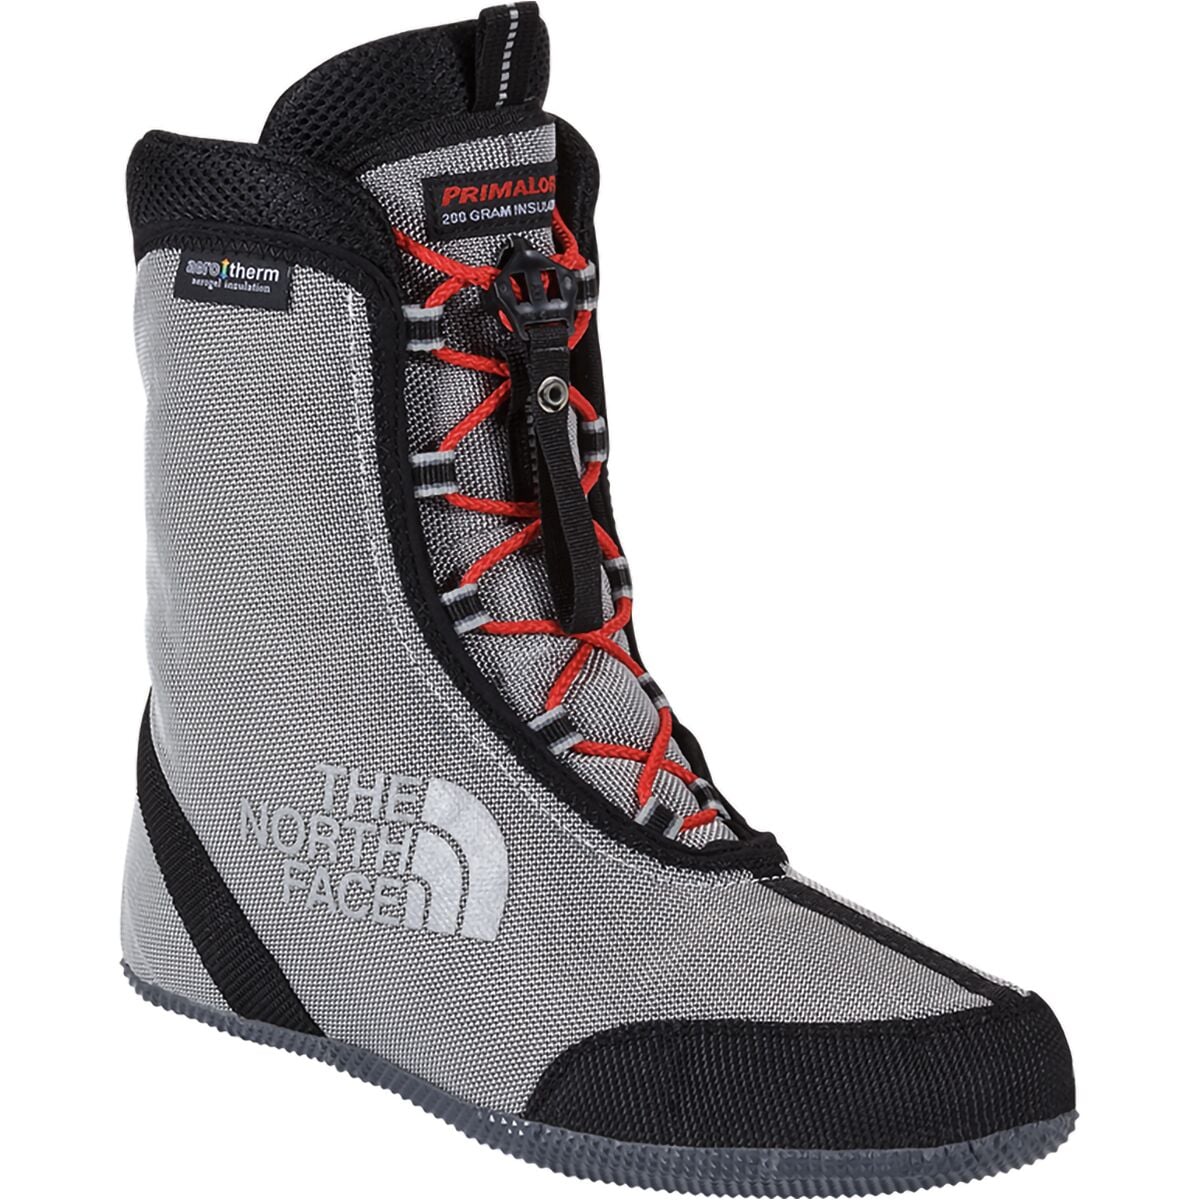 north face verto s6k extreme